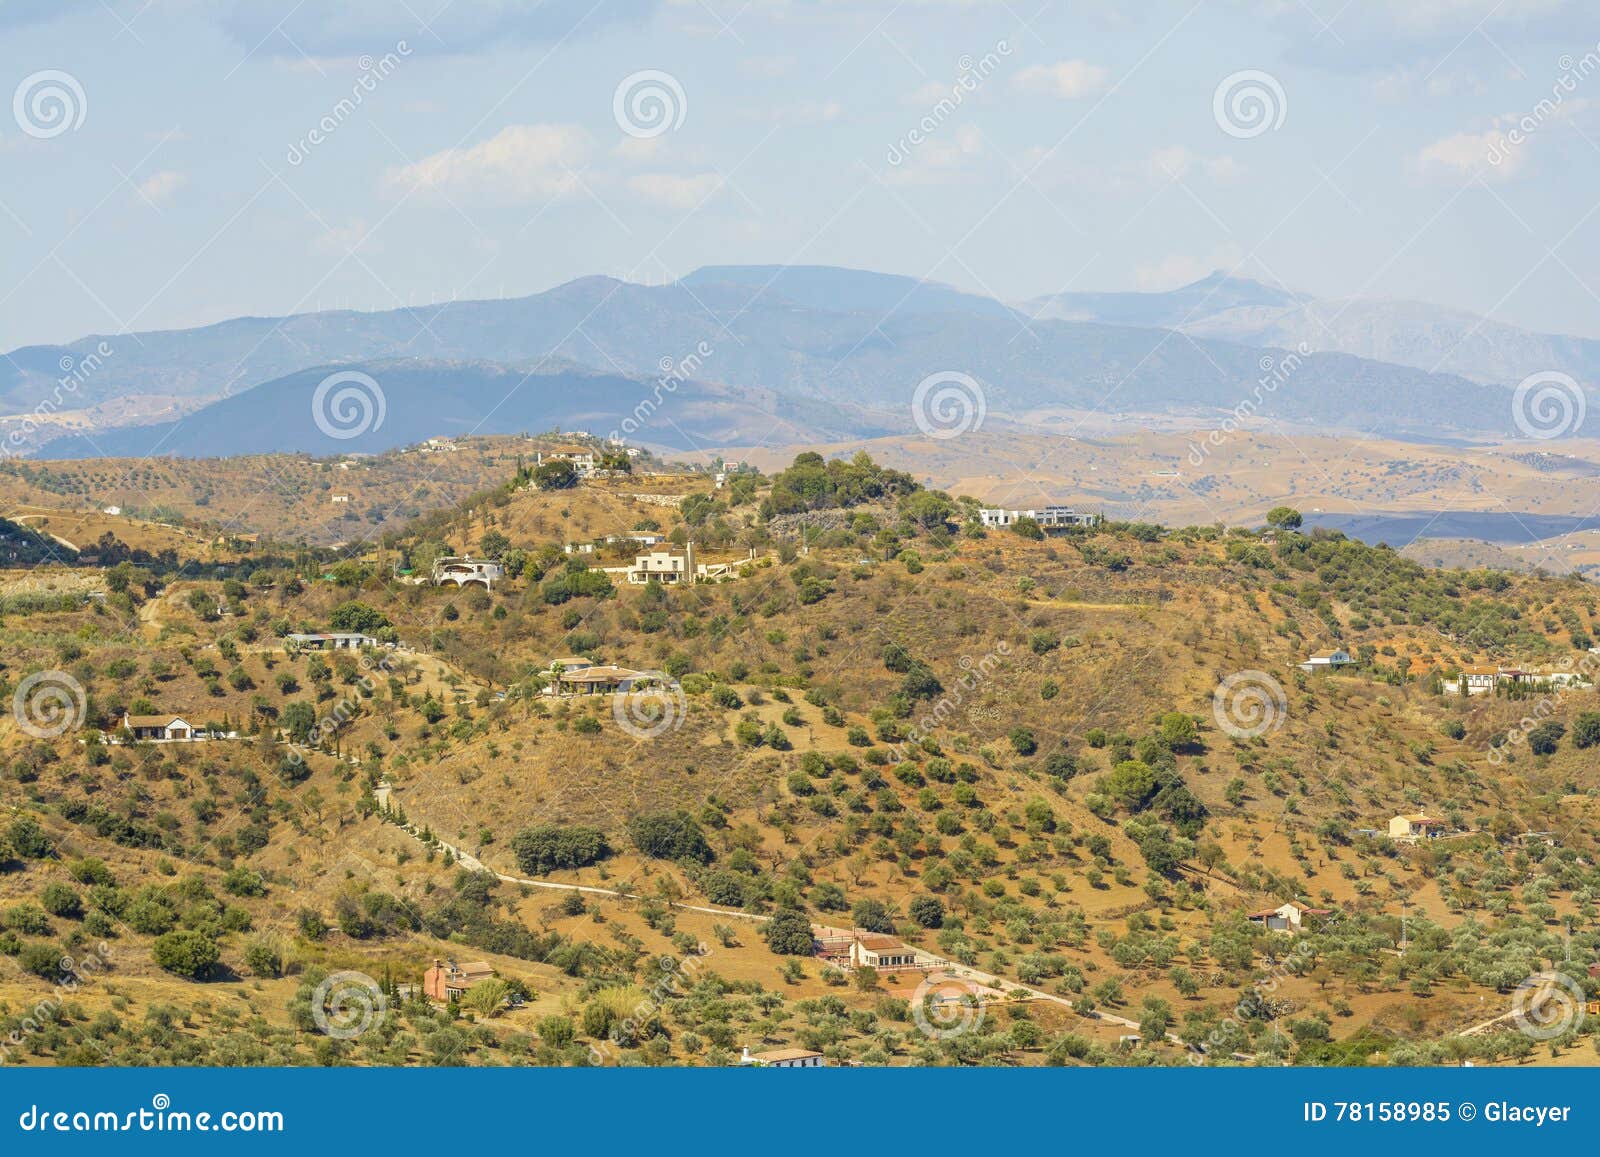 villages in malaga province, andalucia, spain